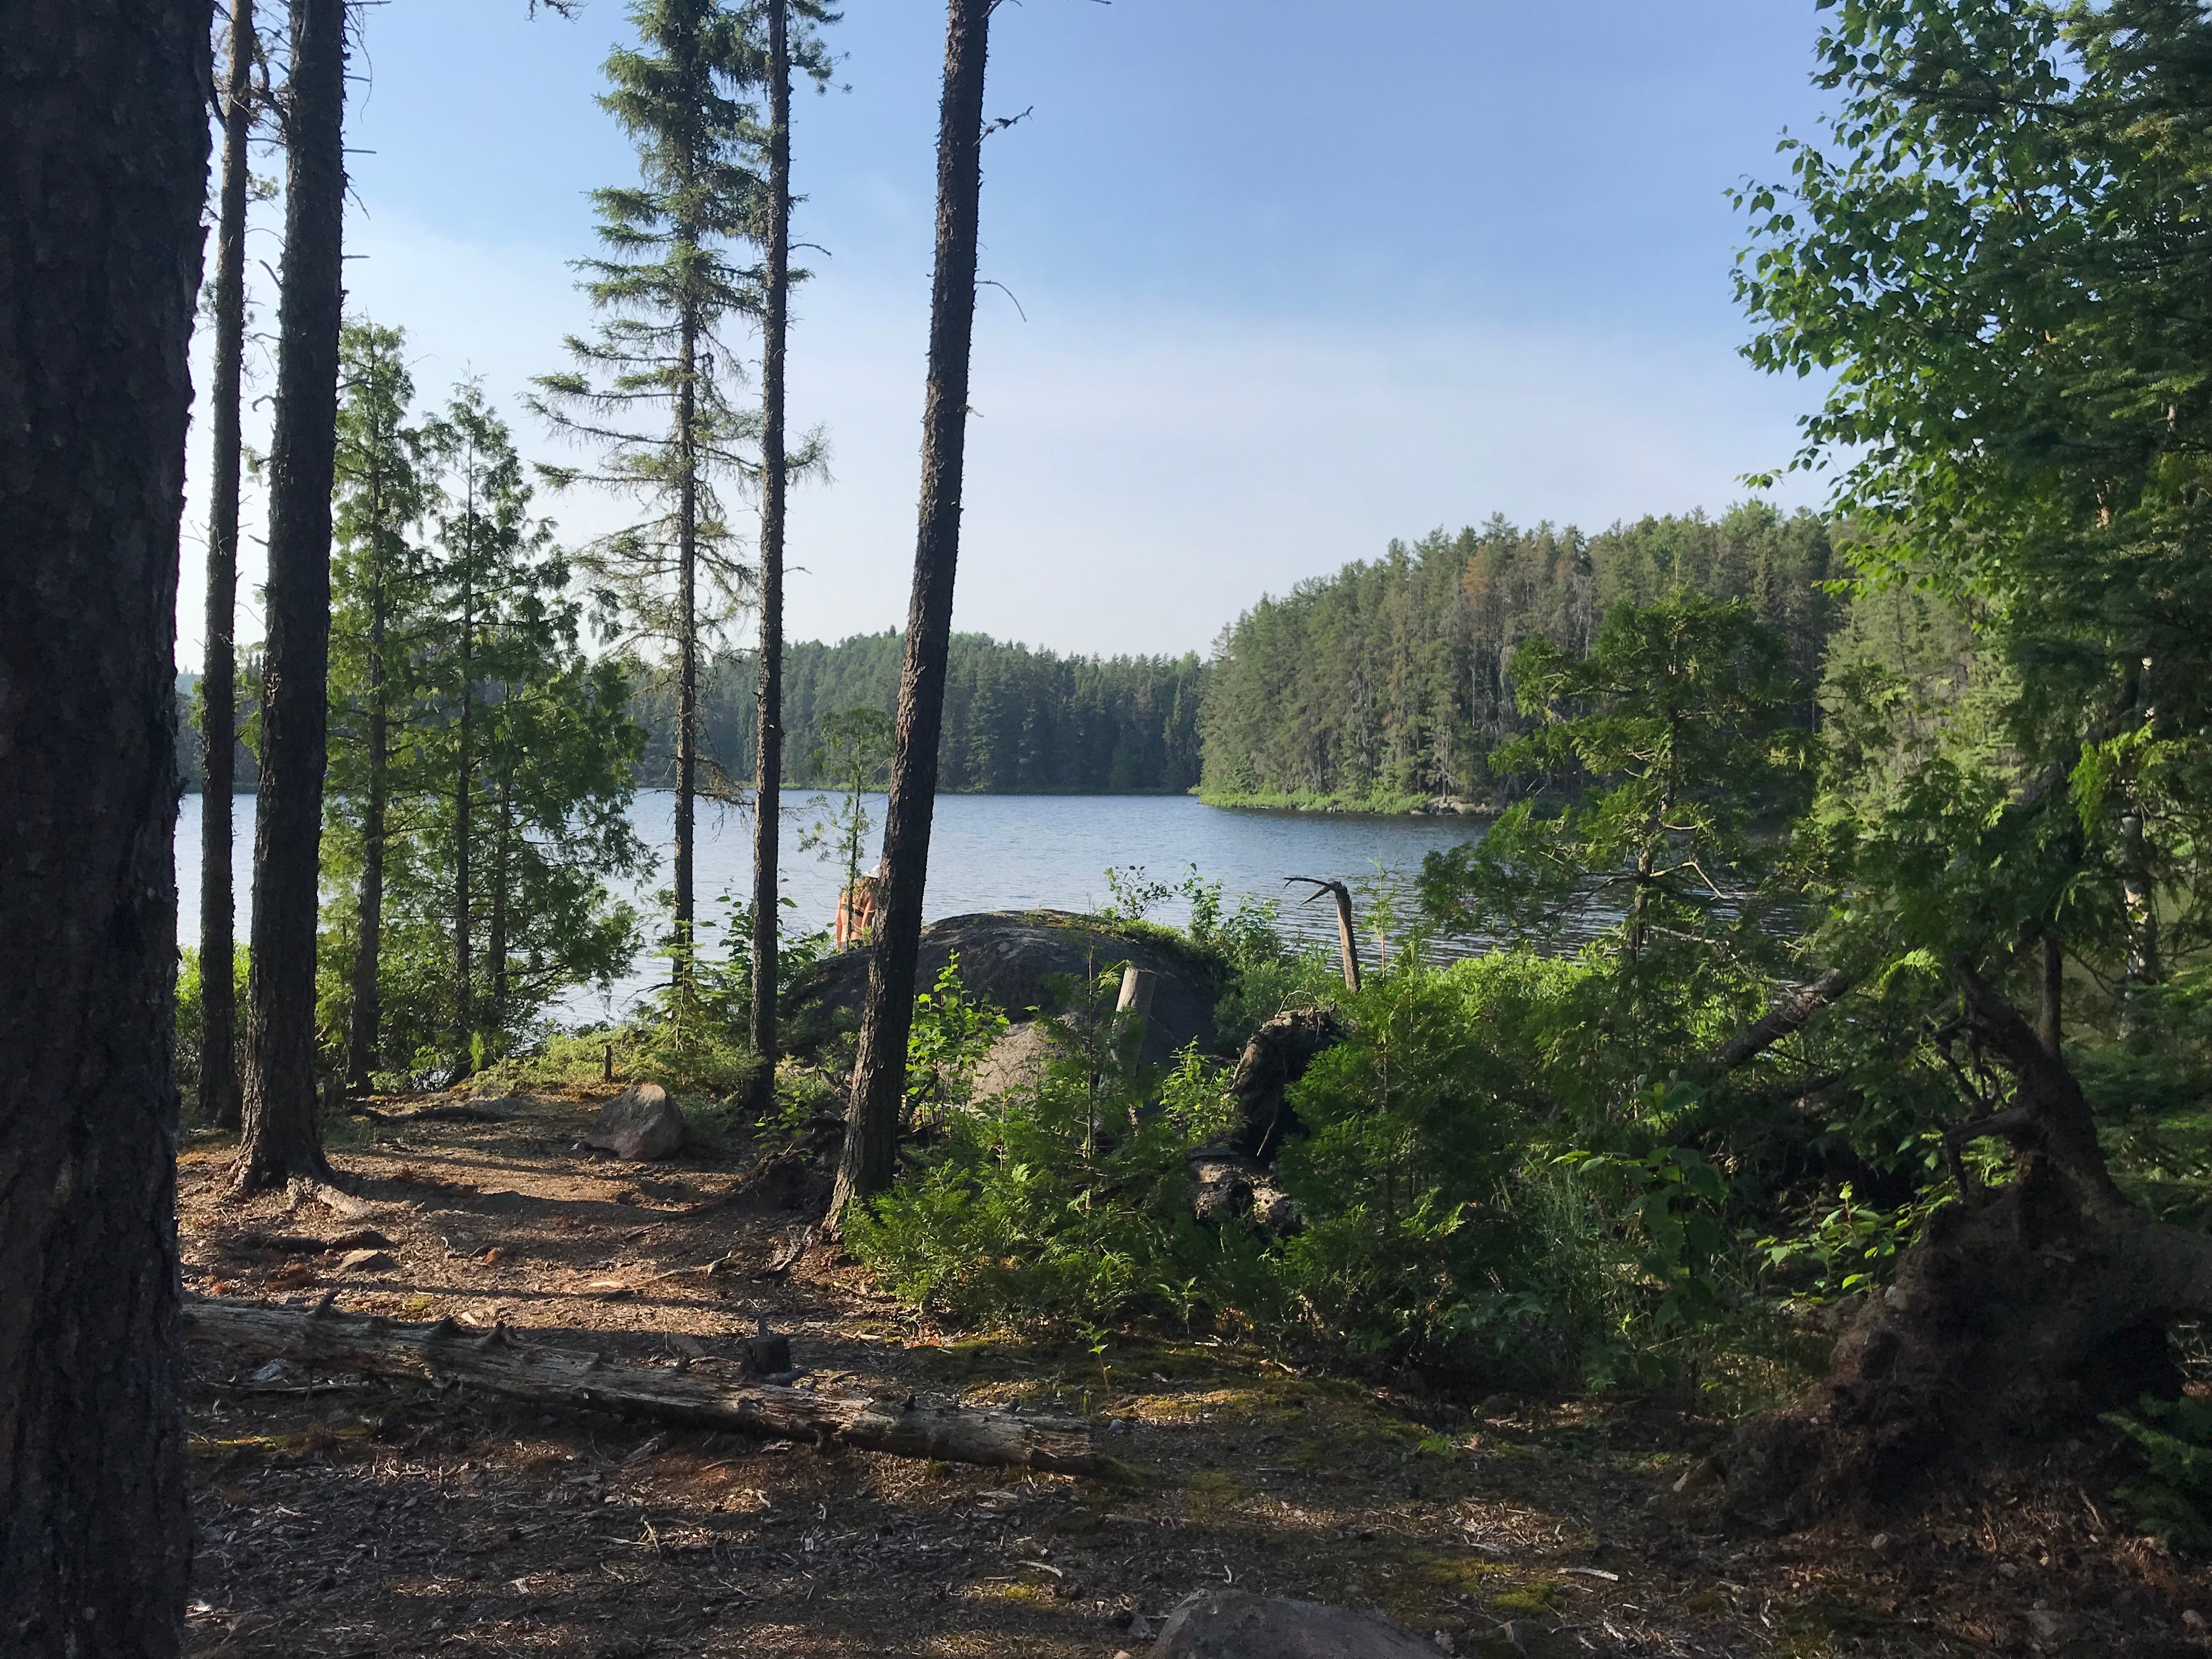 Camper submitted image from Boundary Waters Canoe Area, North Temperance Lake Backcountry Camping Site #905 - 4